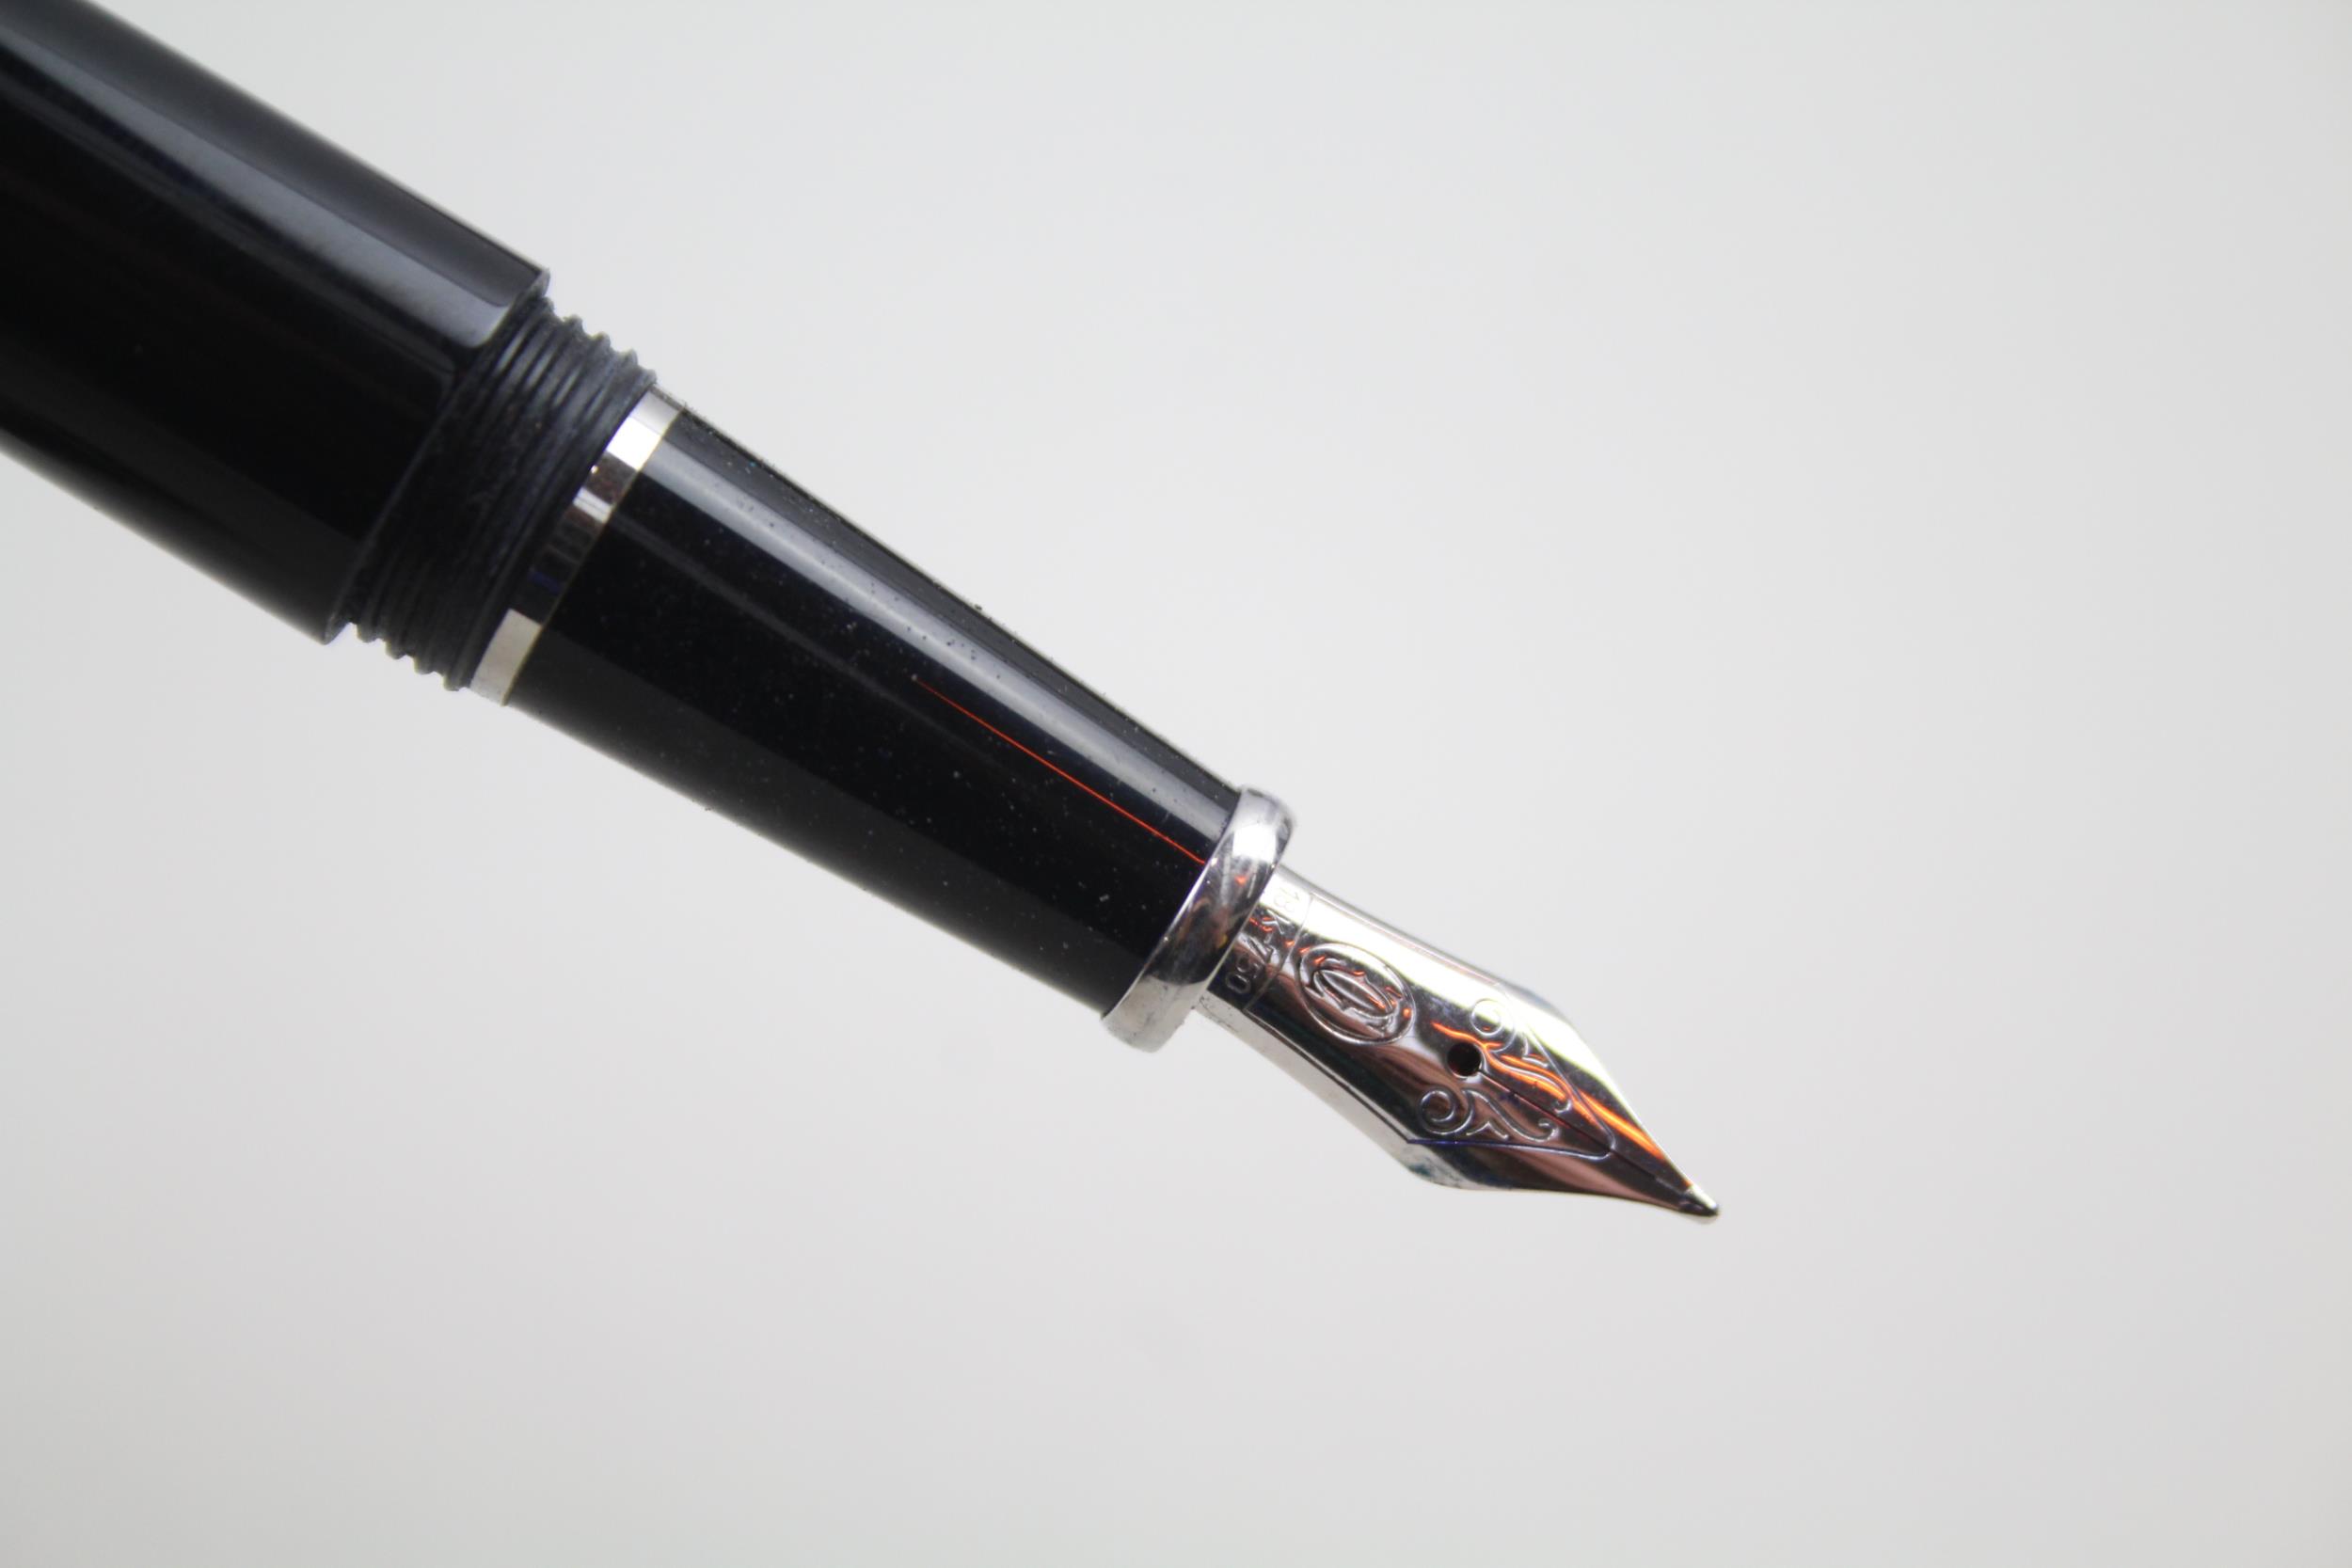 CARTIER Diabolo Black Cased Fountain Pen w/ 18ct White Gold Nib WRITING // Dip Tested & WRITING - Image 6 of 10